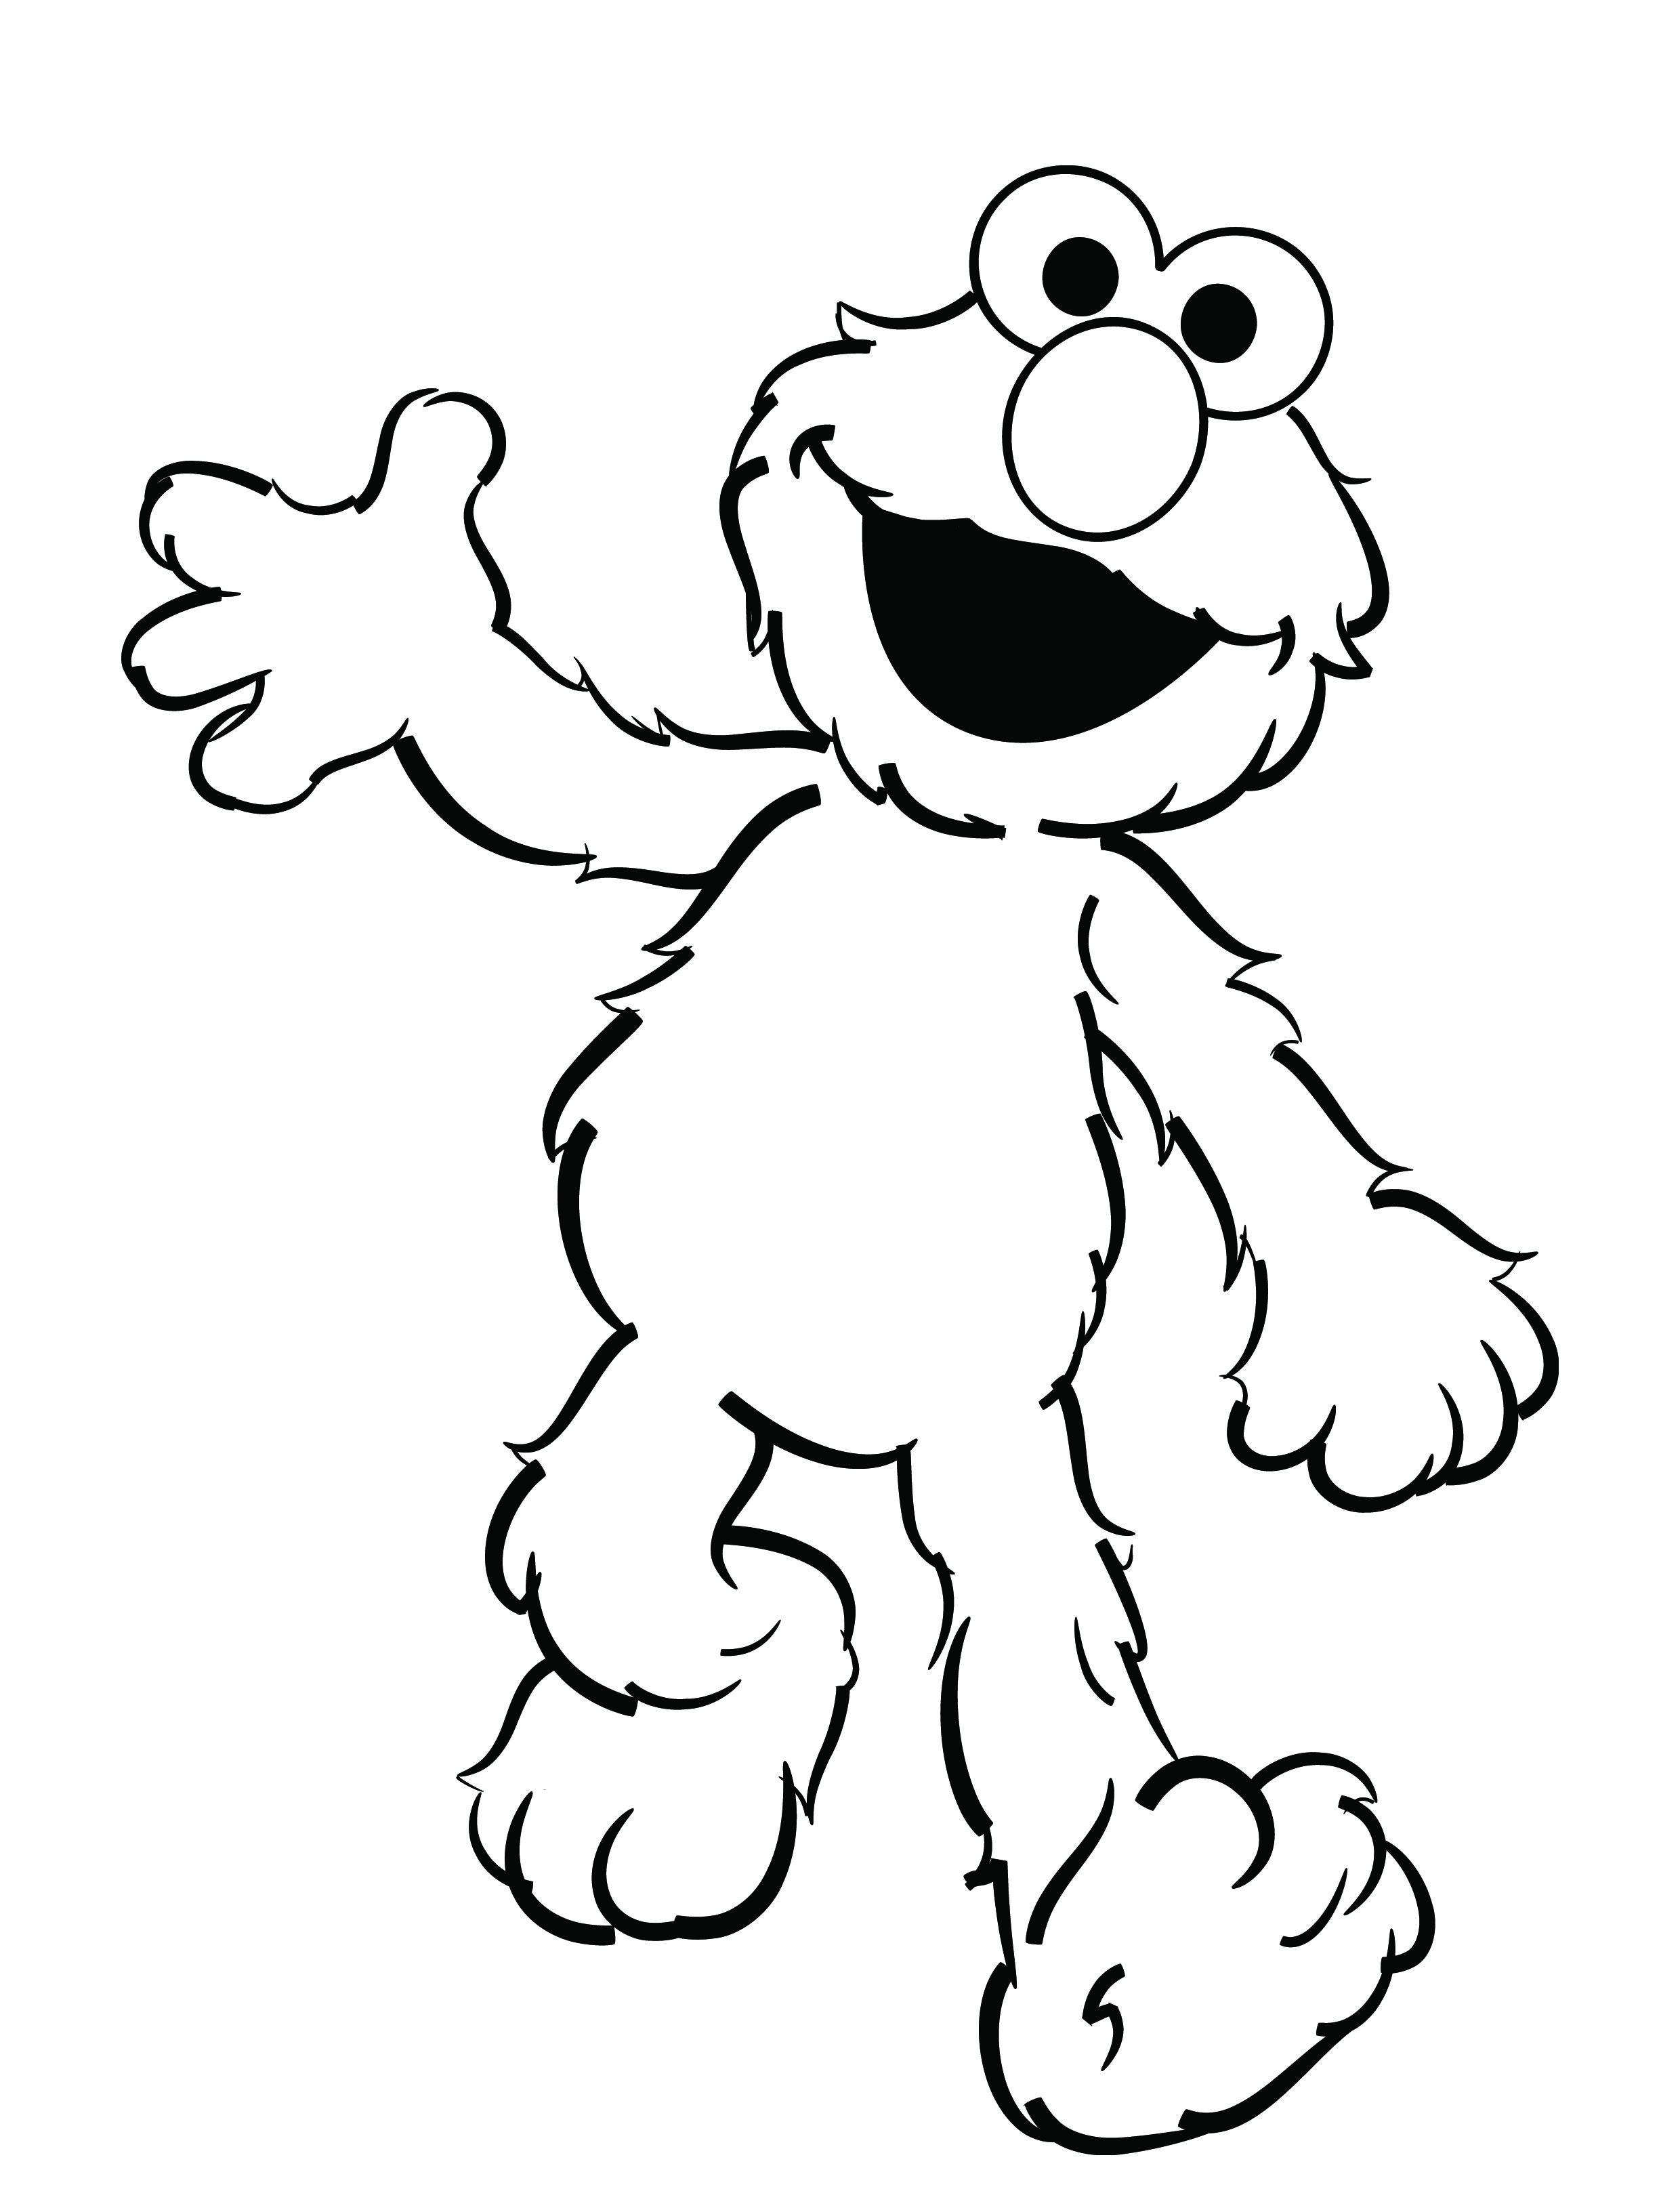 sesame-street-printable-coloring-pages